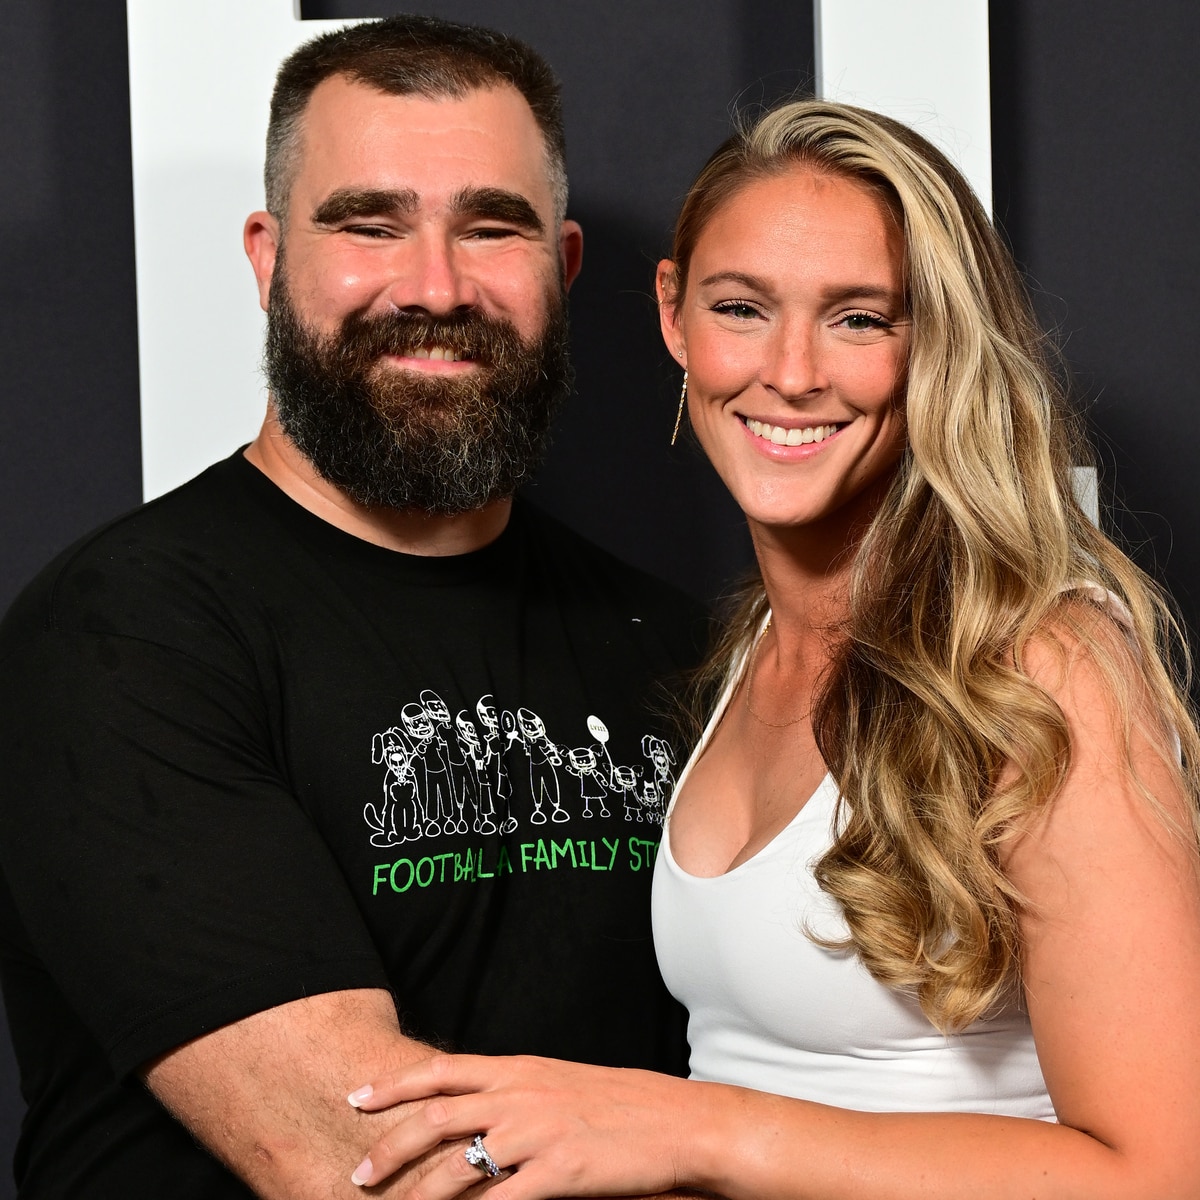 Kylie and Jason Kelce Get Apology From Fan for “Heated” Confrontation